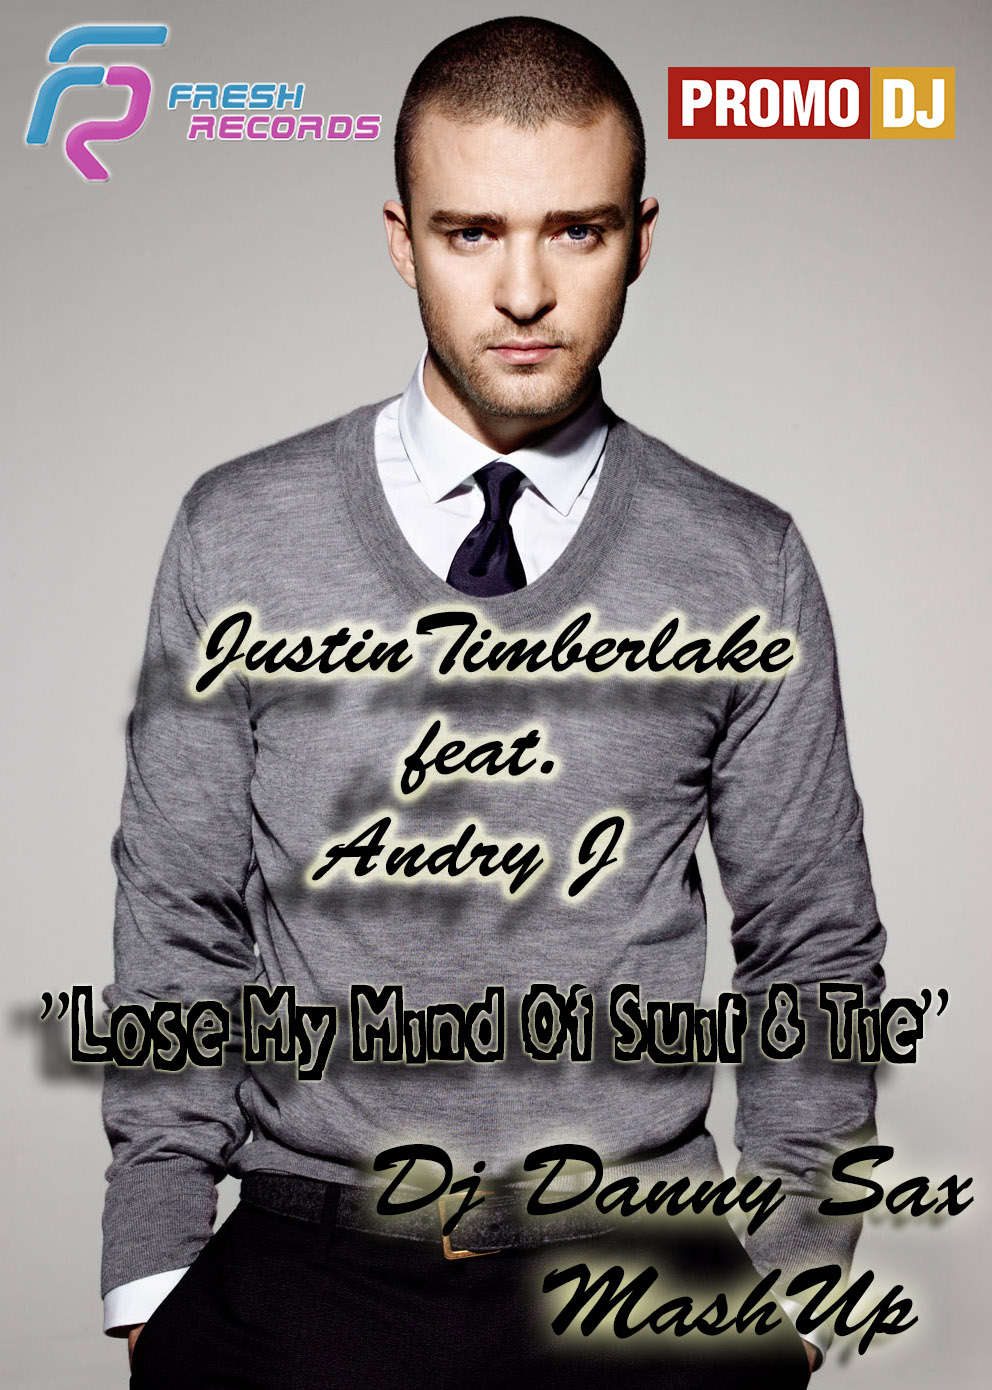 Justin Timberlake feat. Andry J - Lose My Mind Of Suit & Tie (Dj Danny Sax MashUp)